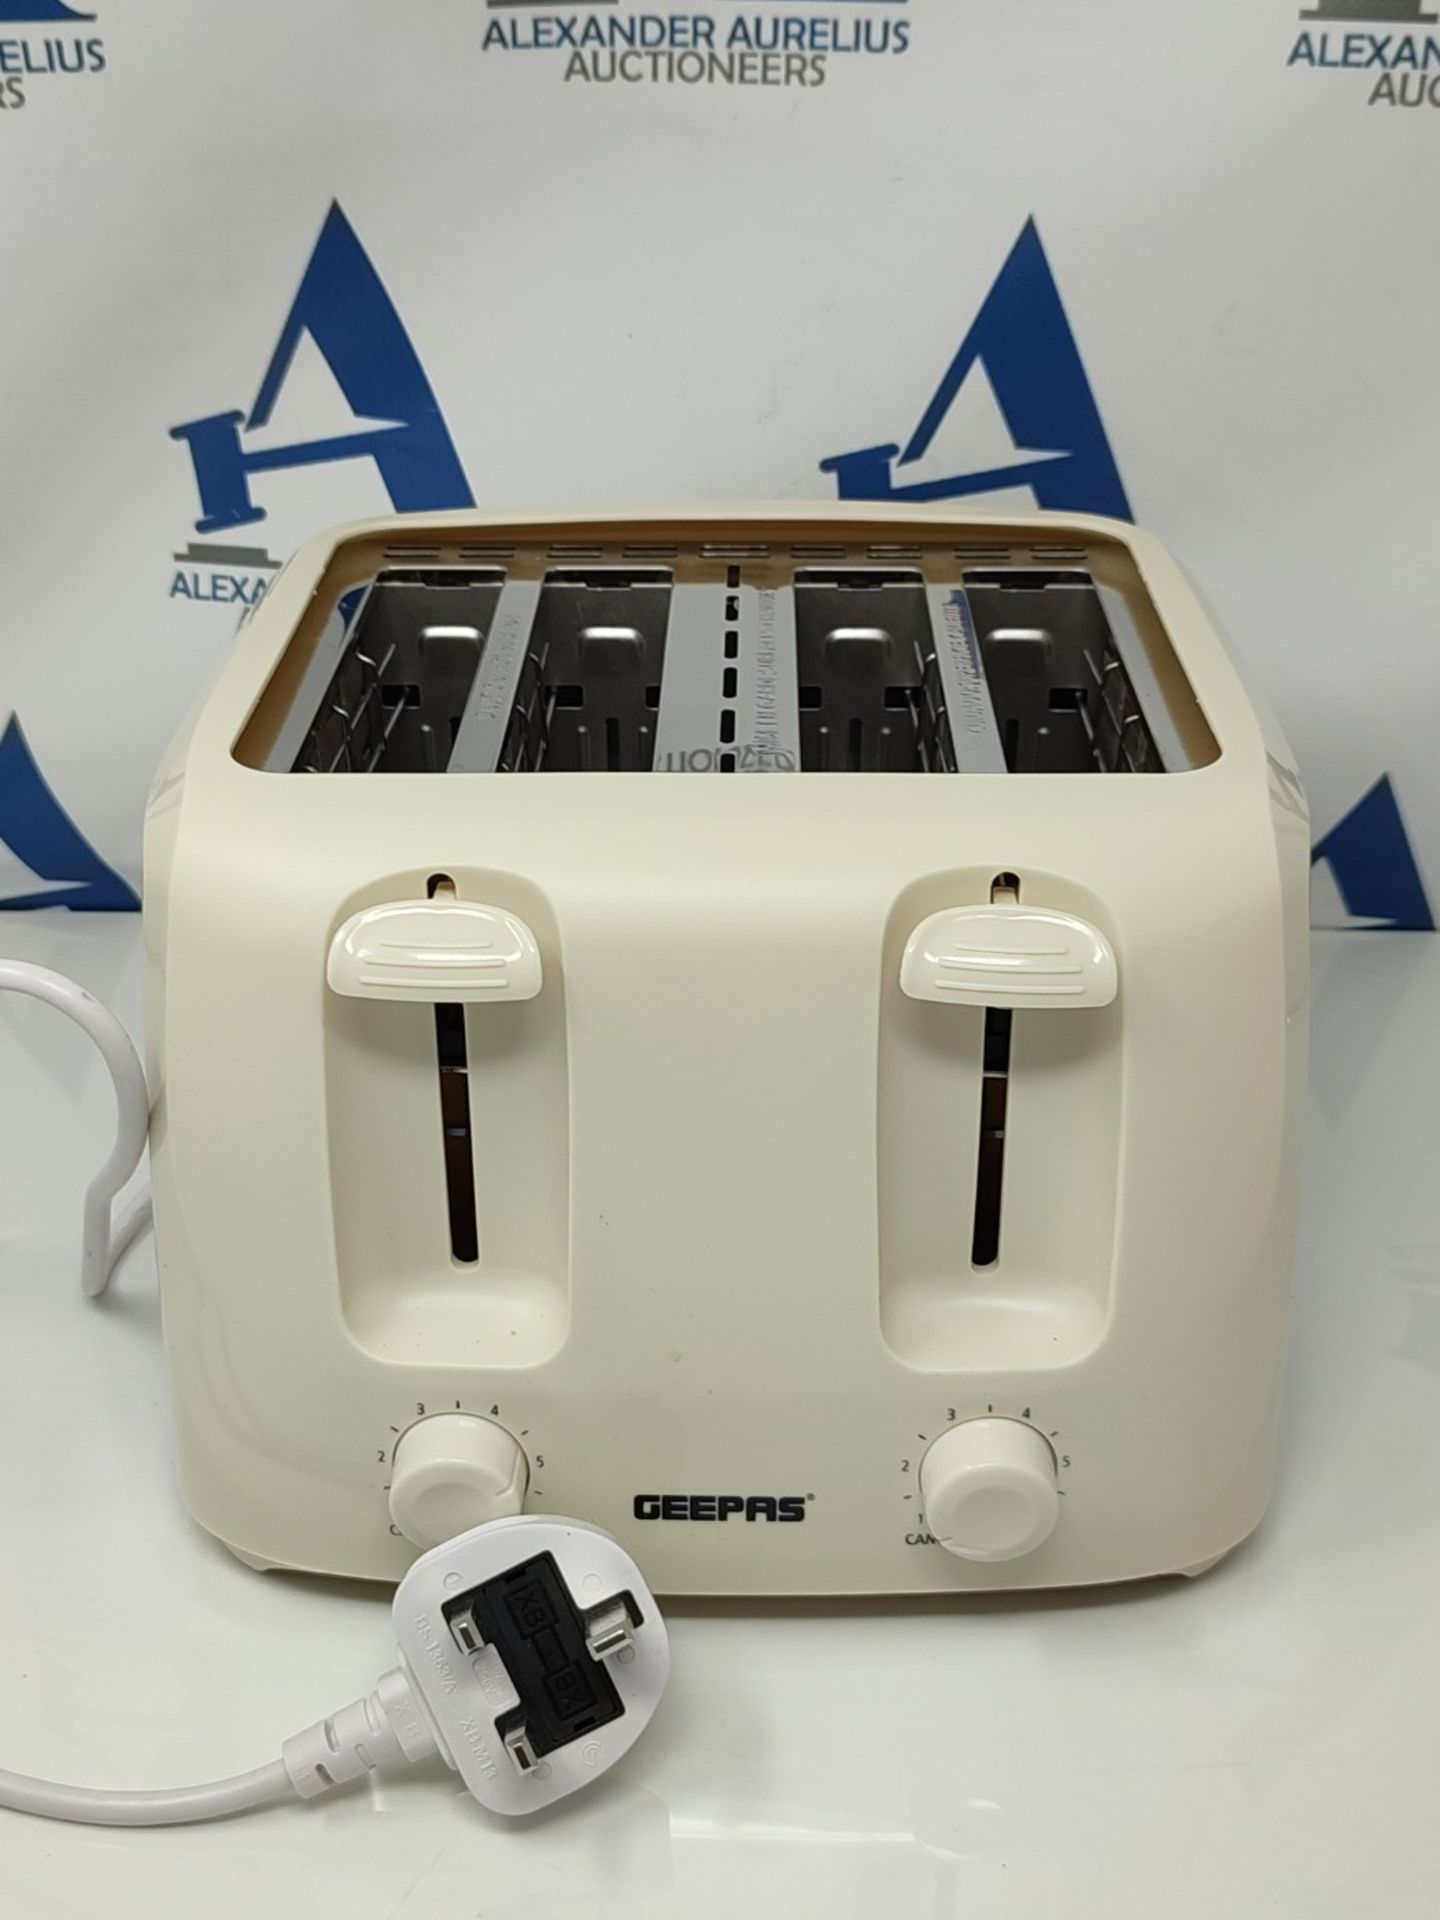 Geepas 4 Slice Bread Toaster with 6 Level Browning Control | Removable Crumb Tray, Can - Image 2 of 2